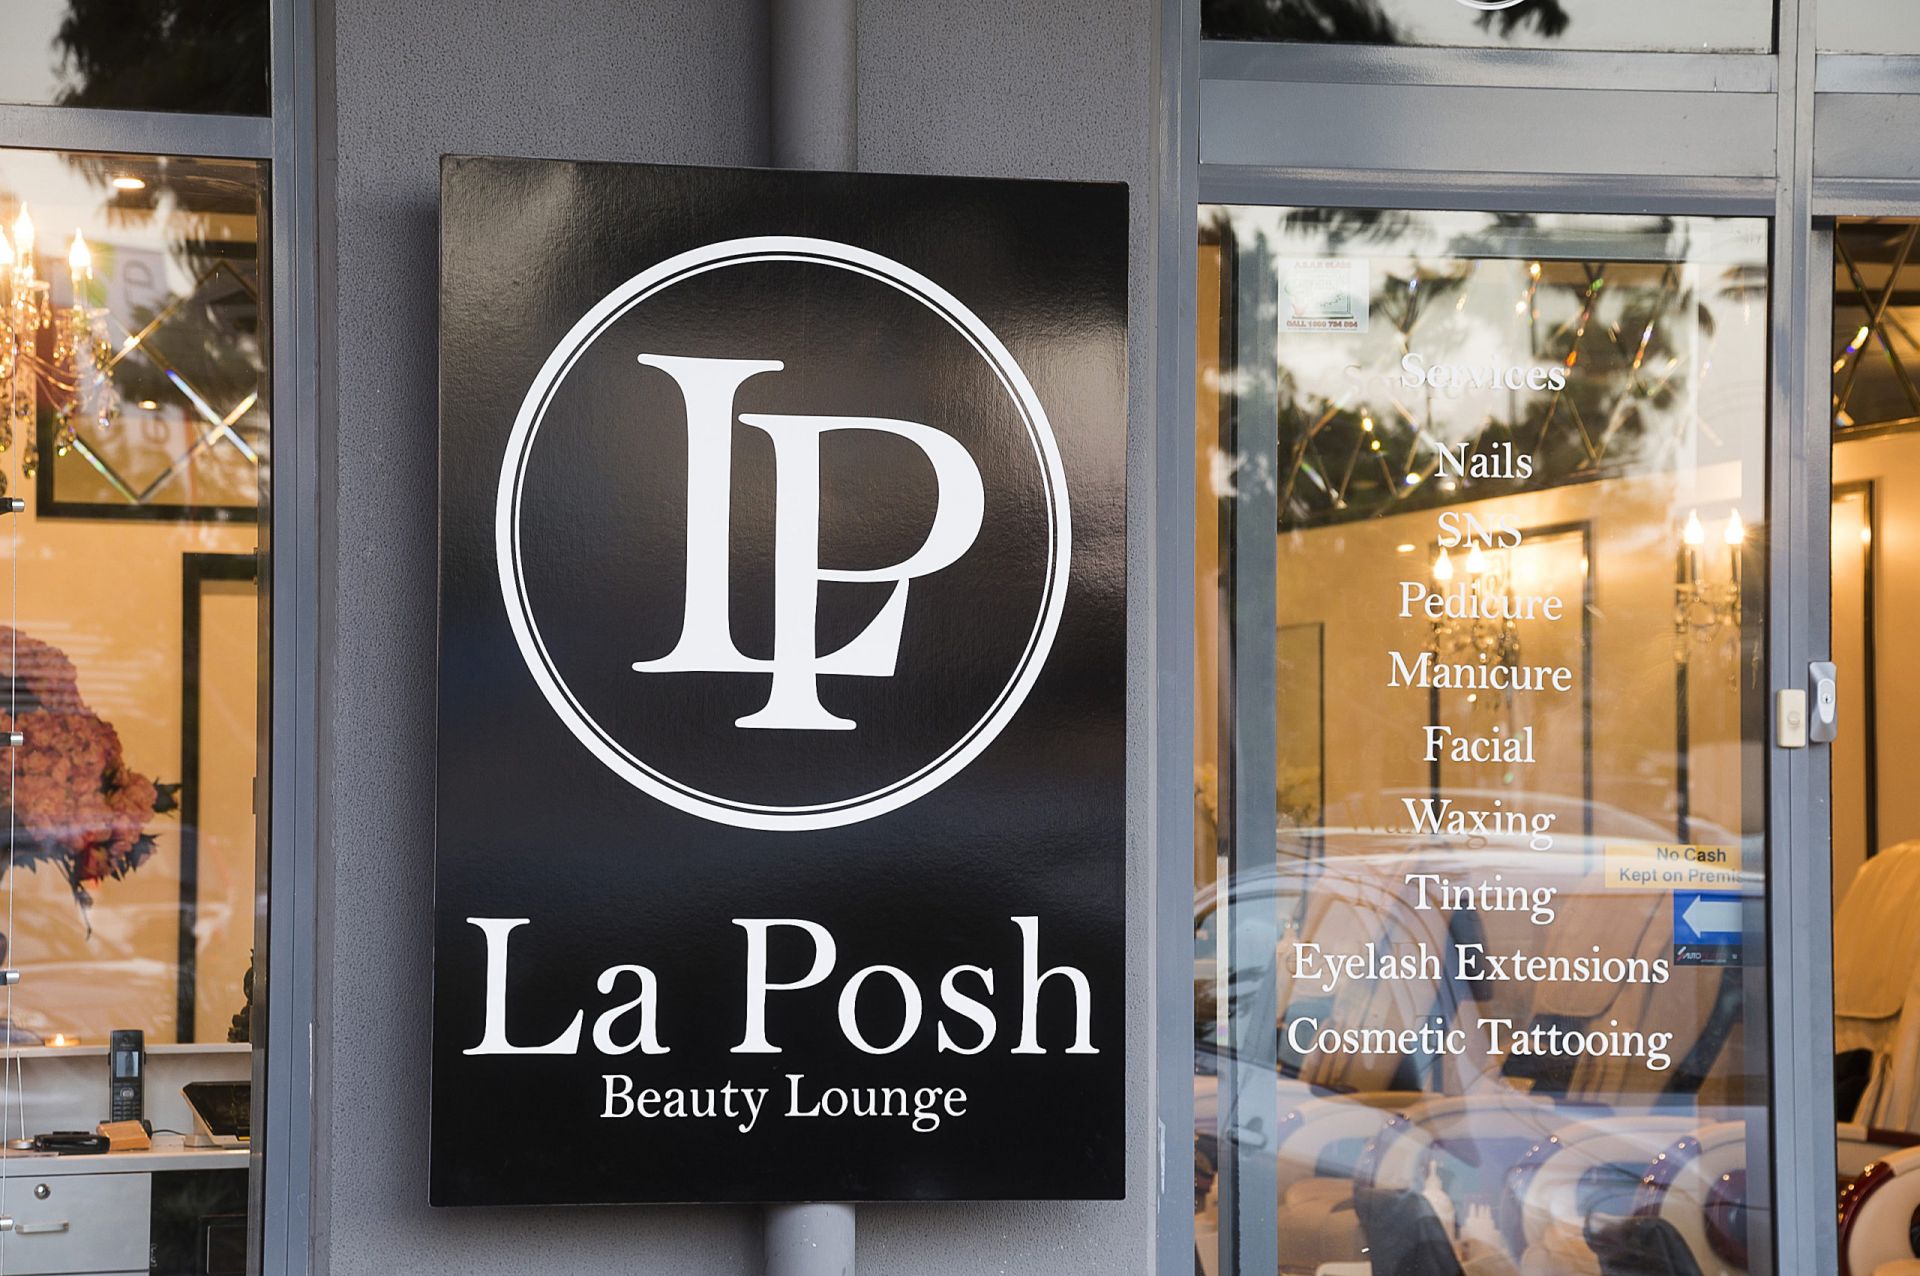 Luxurious Beauty and Nail Salon in High-end...Business For Sale